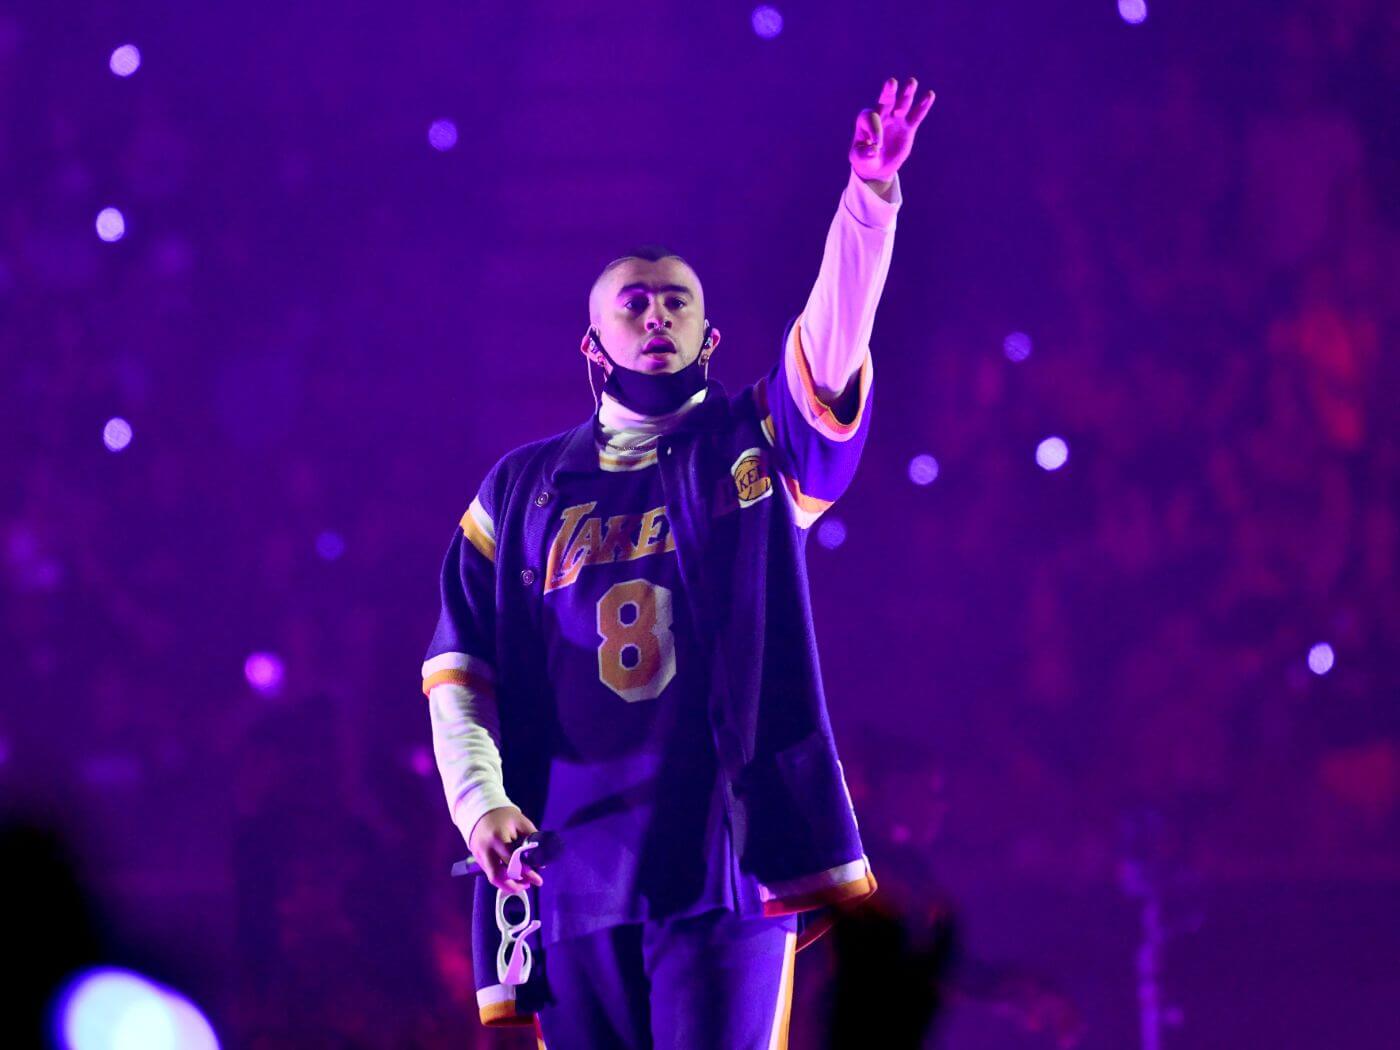 Rapper Mac Miller performs on stage wearing a Lakers jersey. - Bad Bunny